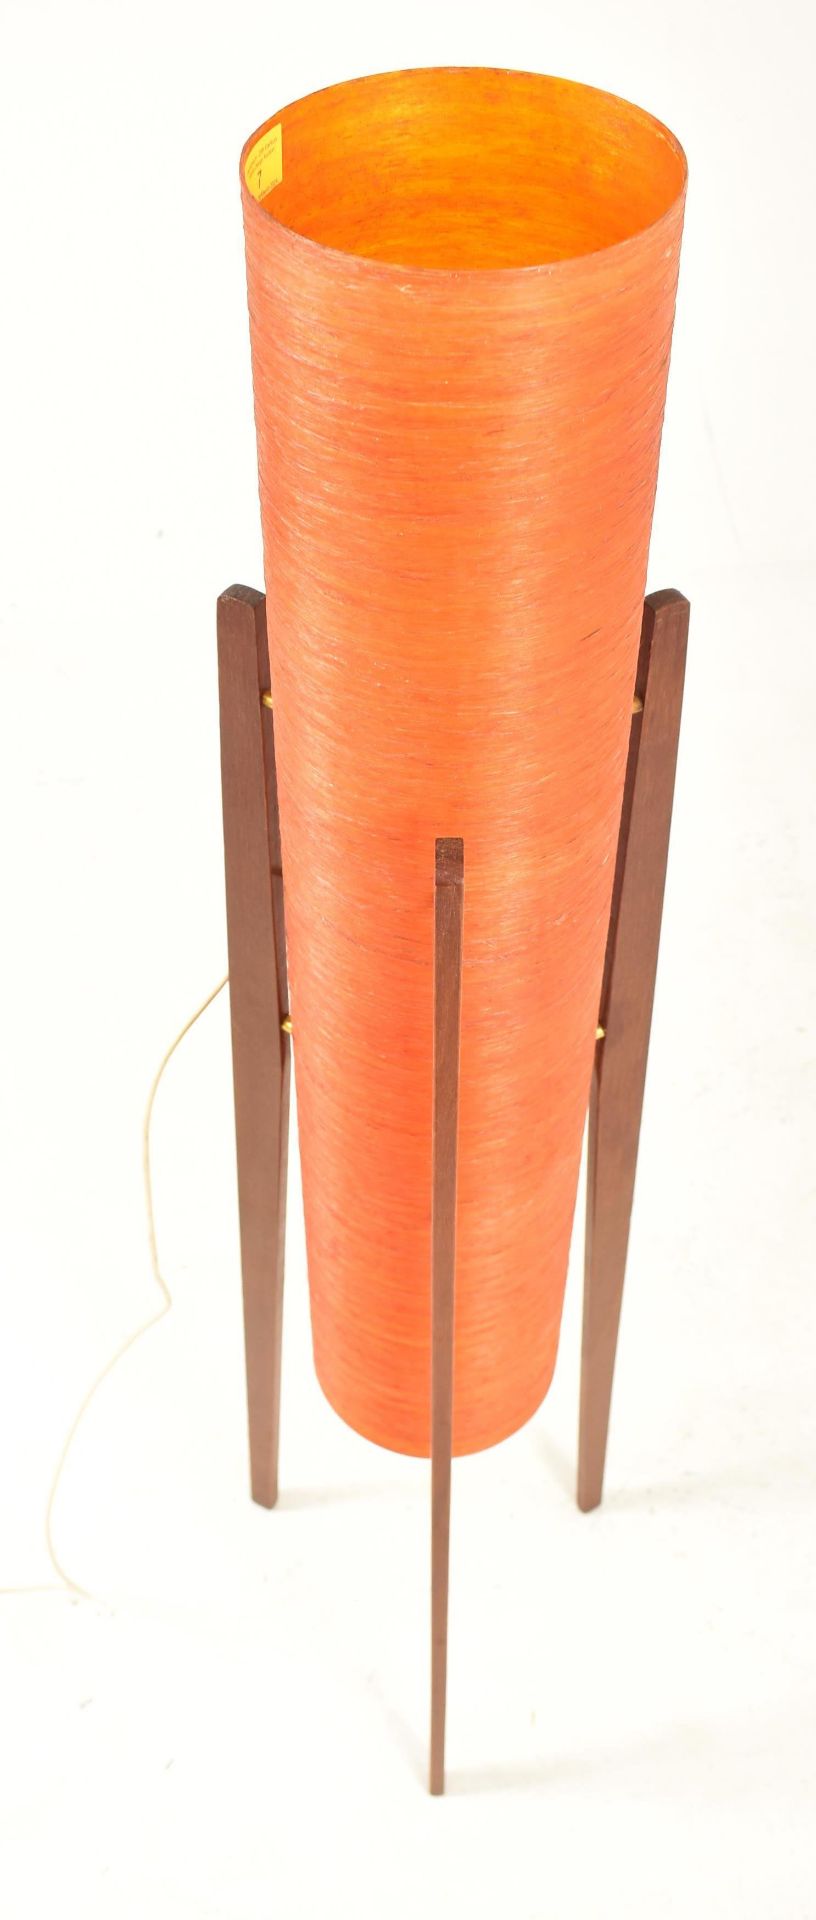 ROCKET LAMP - MID CENTURY SPACE AGE LAMP - Image 2 of 5